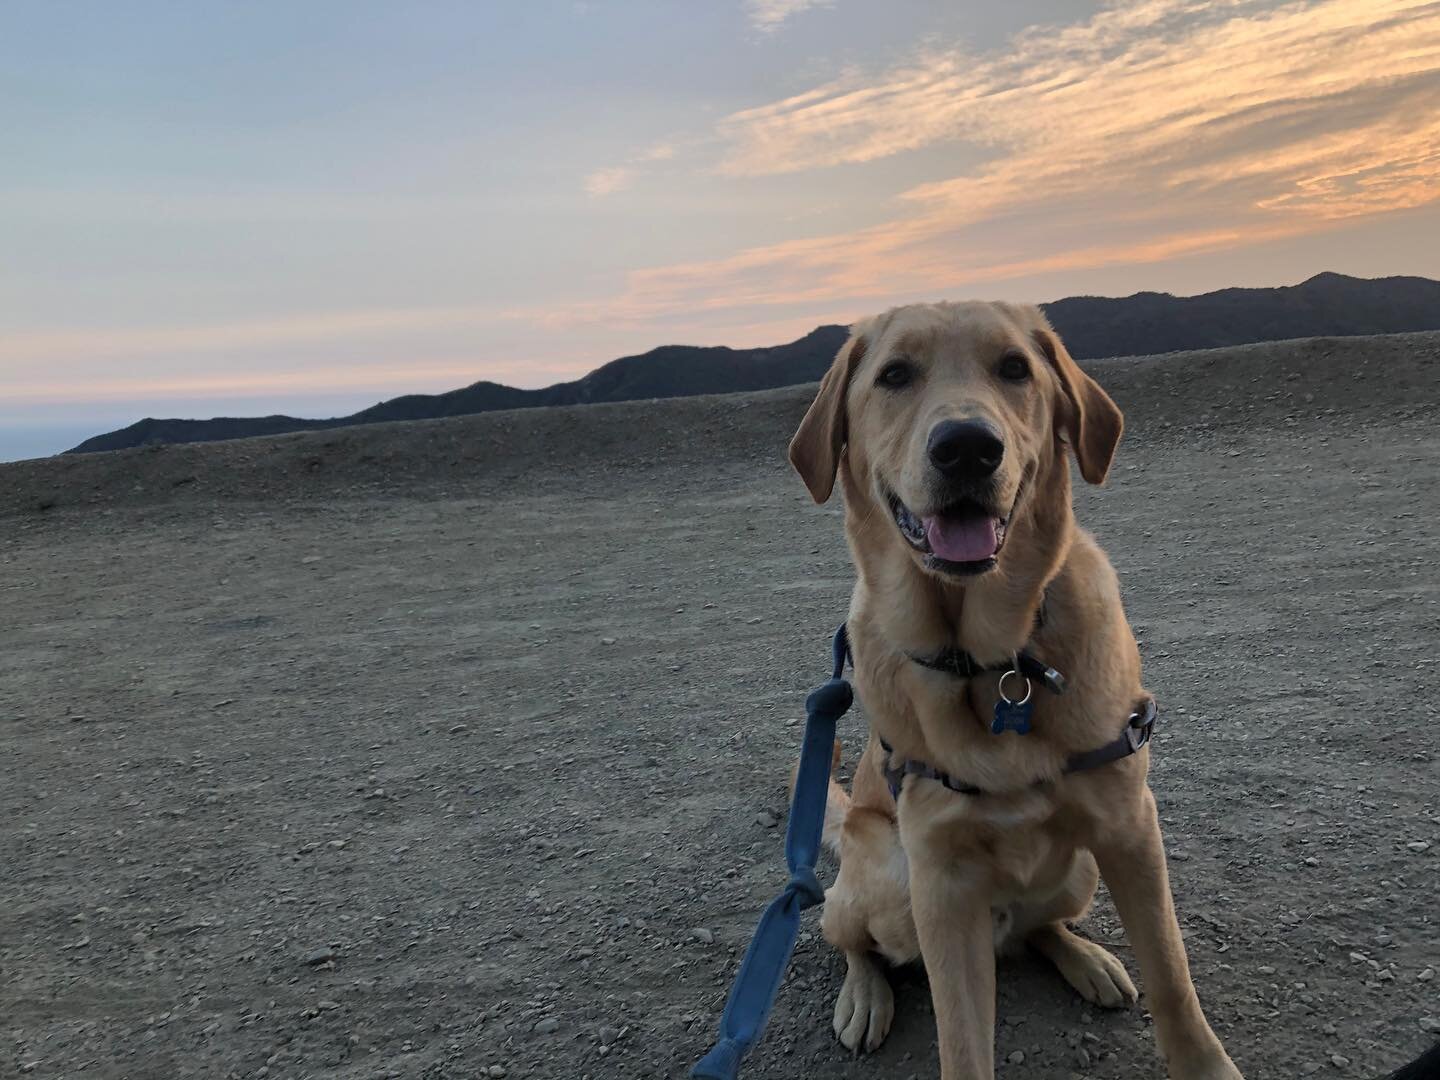 Another update on our newest service dog in training @VanderpumpDogs Lenny, and his training! Lenny is an adorable 8 month old golden retriever mix (73% golden, lab, and poodle mix) full of love and puppy spirit! He is currently learning boundaries, 